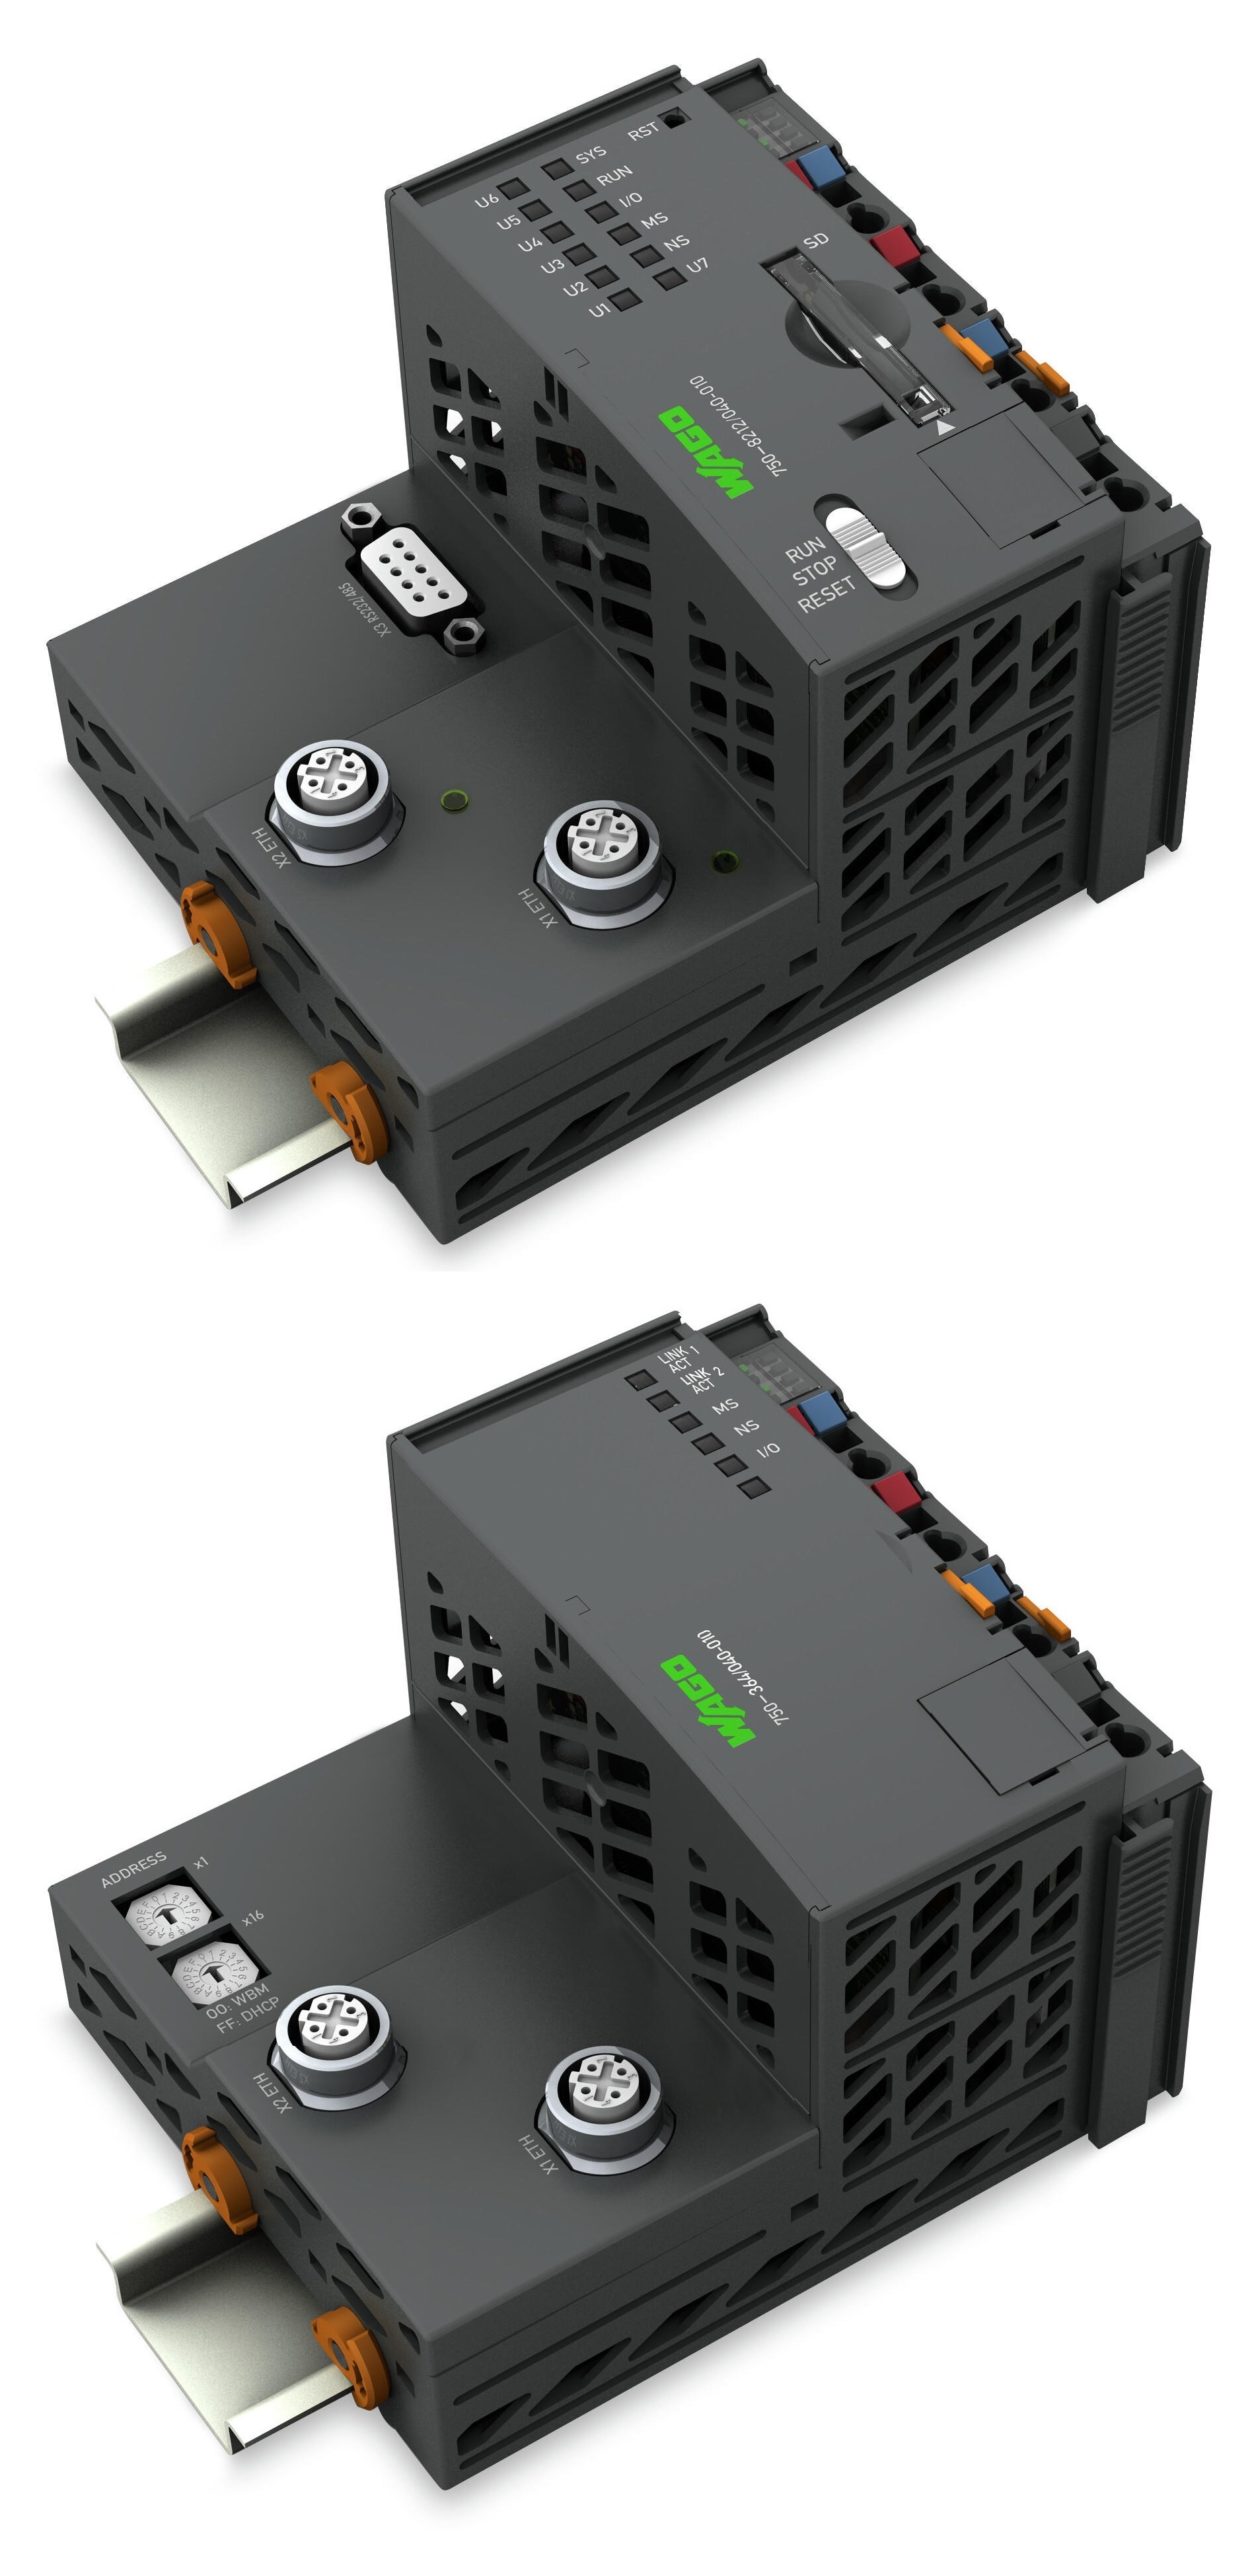 New product - WAGO Generation 2 PFC200 PLC controllers 